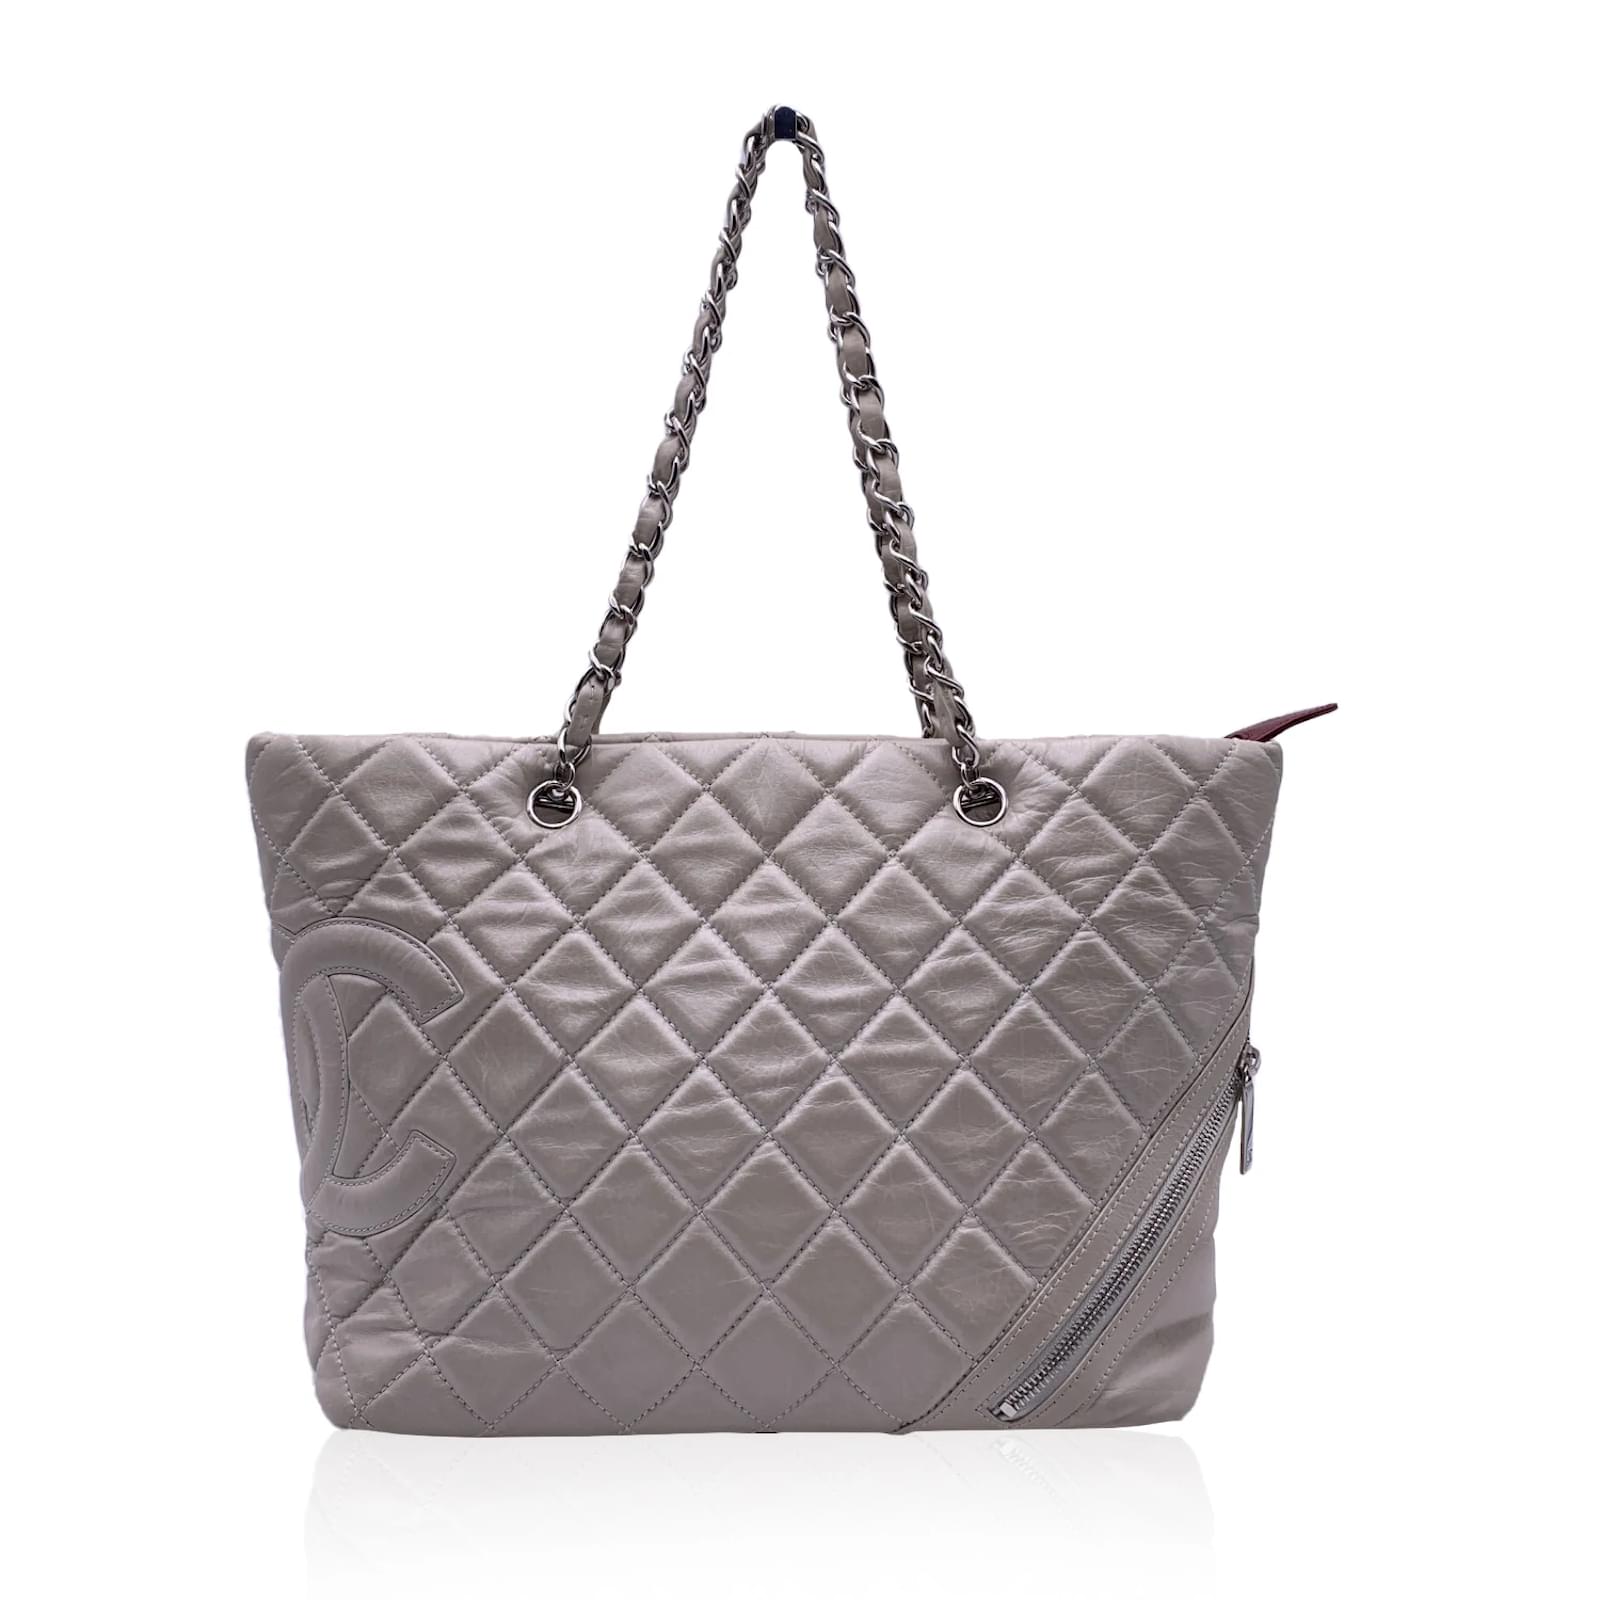 CHANEL Aged Calfskin Quilted Large Cotton Club Tote Pearl